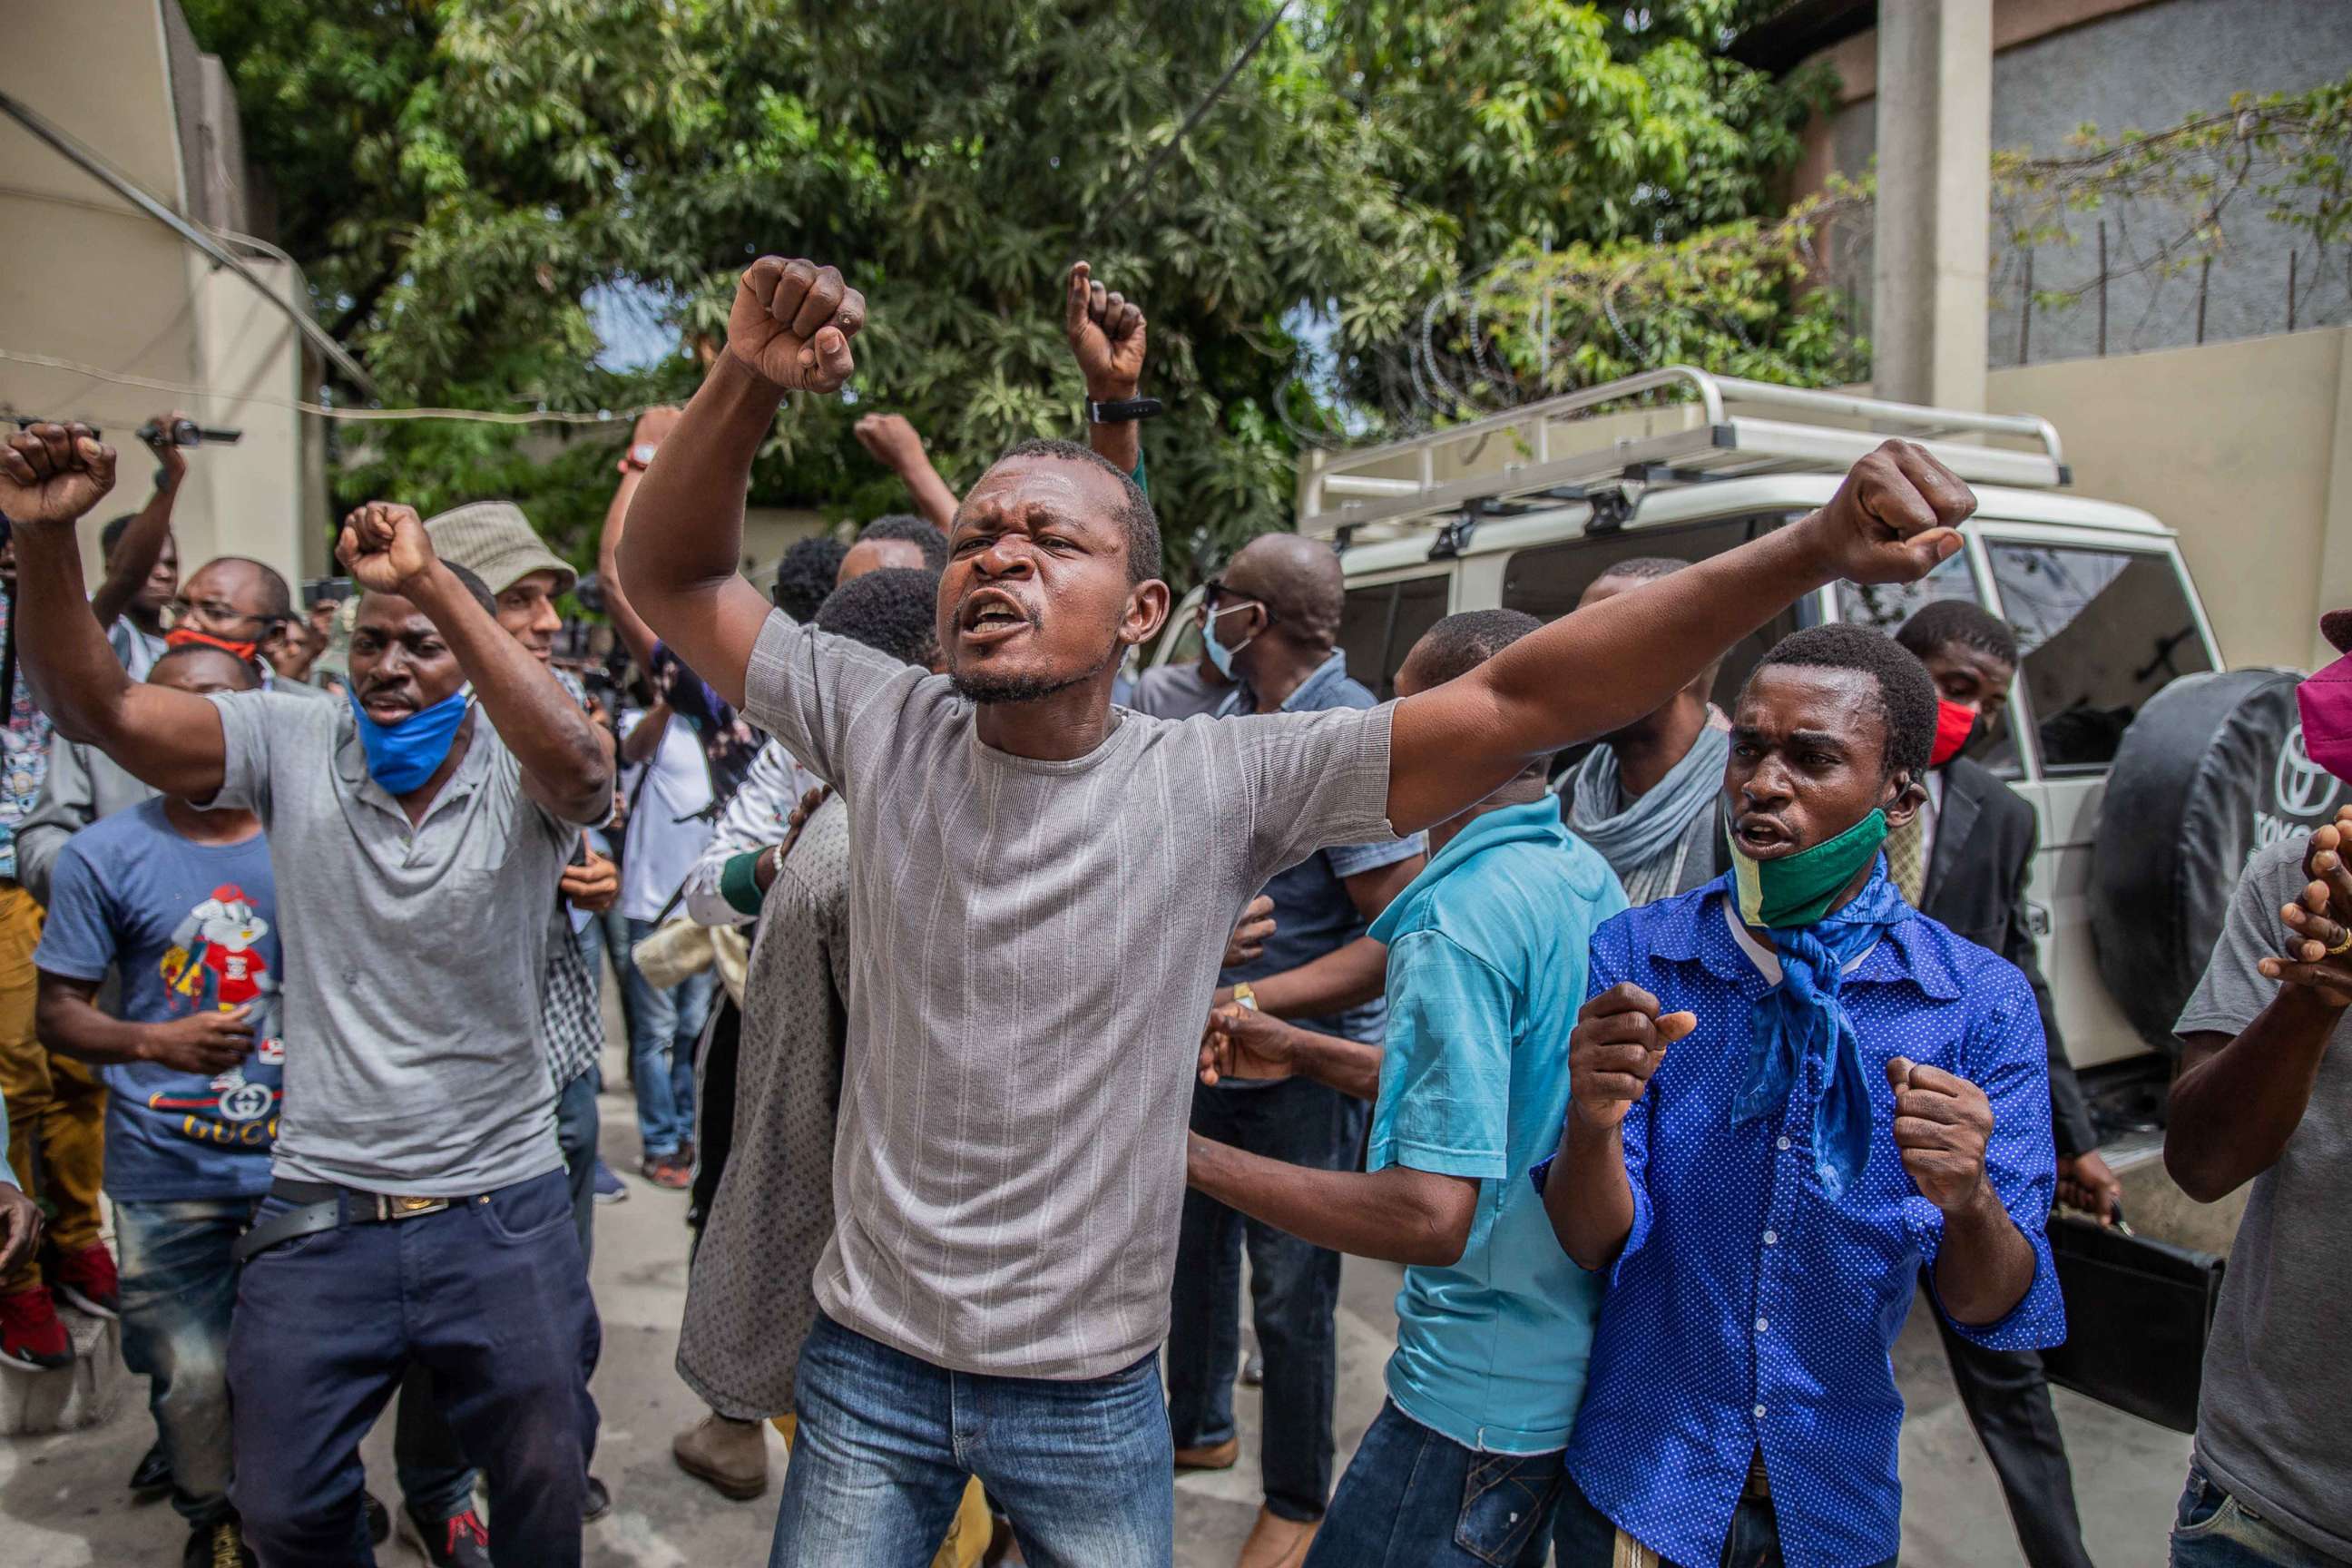 PHOTO: Supporters of former Senate President Youri Latortue shout outside a courthouse where Latortue and former senator Steven Benoit are being questioned on July 12, 2021 in Port-au-Prince, Haiti.